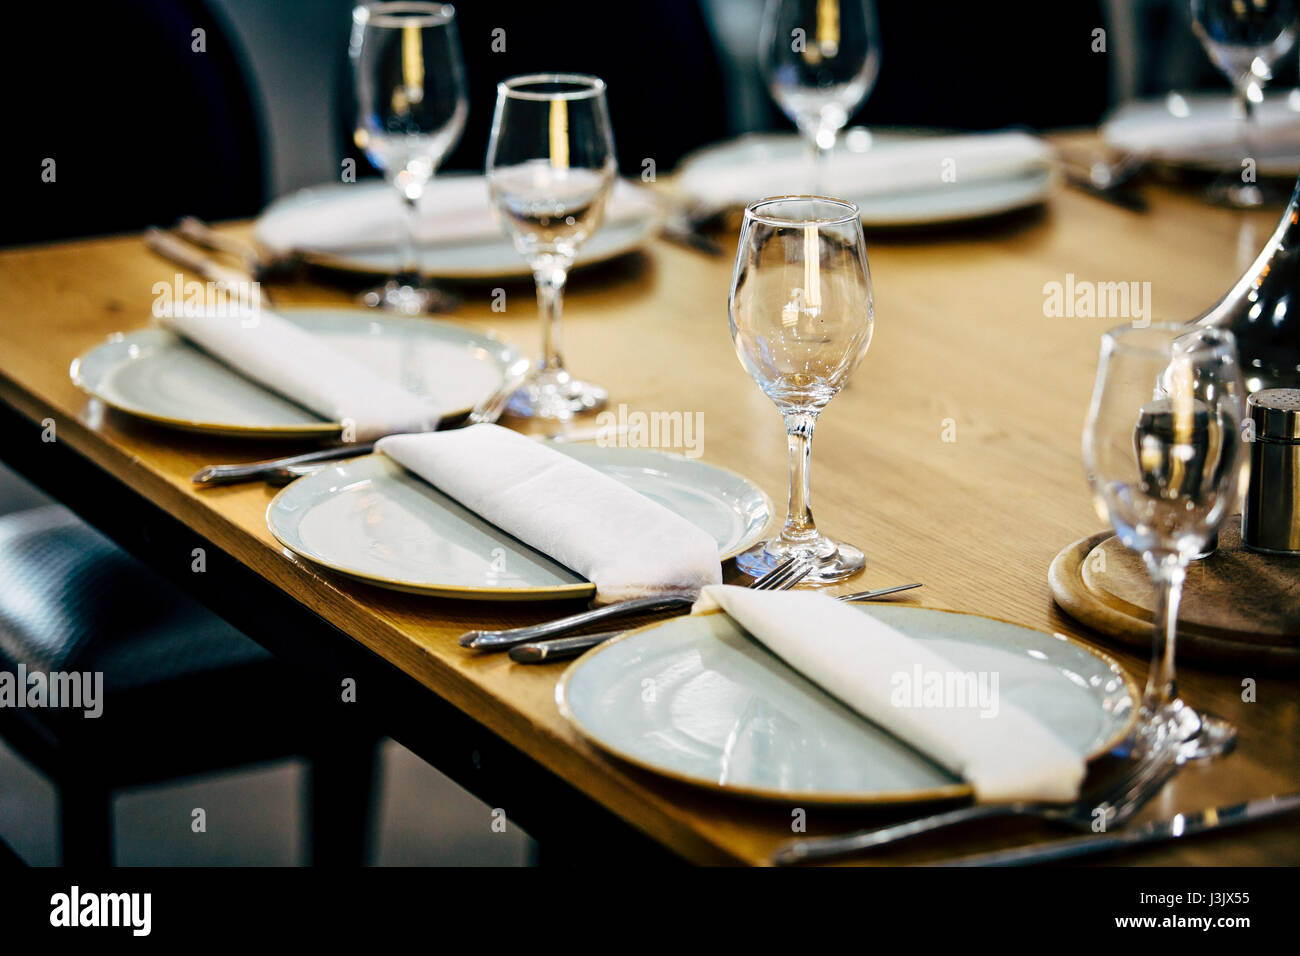 Design details of luxury events. Things like beautiful table setting ready for the event. Stock Photo